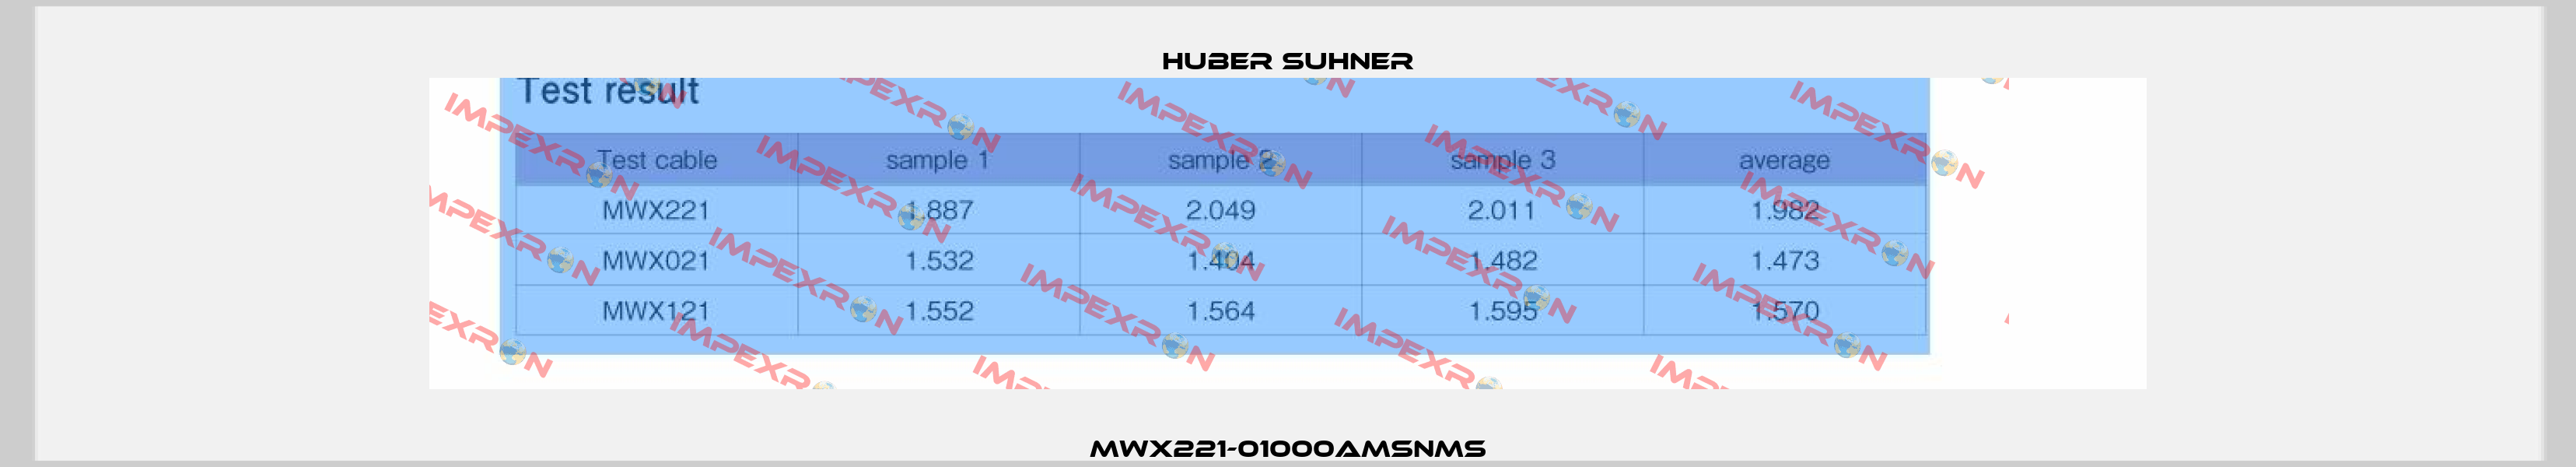 MWX221-01000AMSNMS Huber Suhner